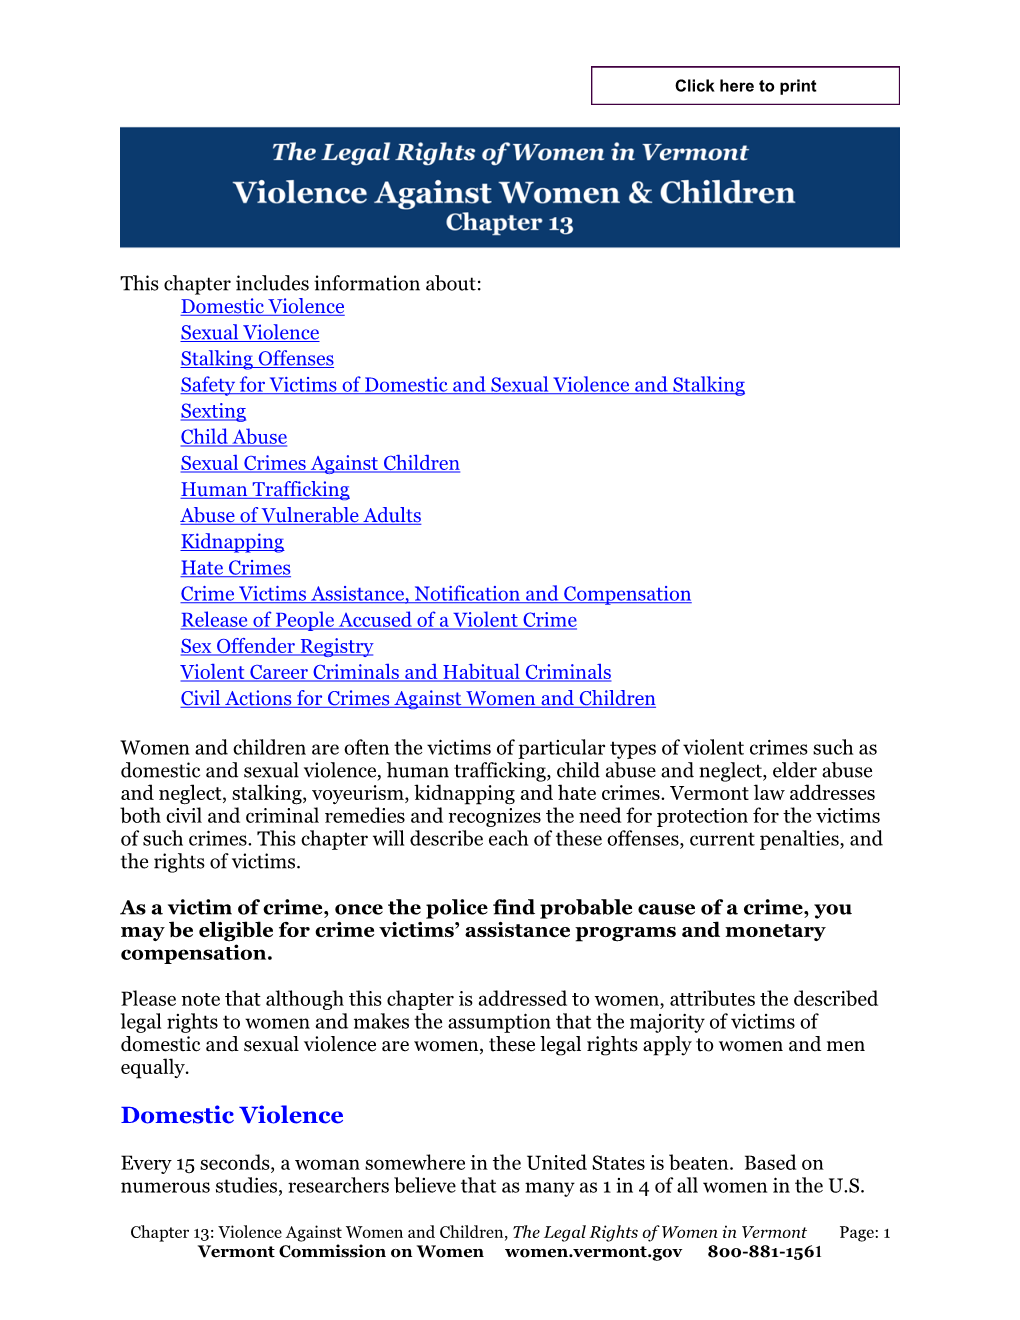 Chapter 13: Violence Against Women and Children